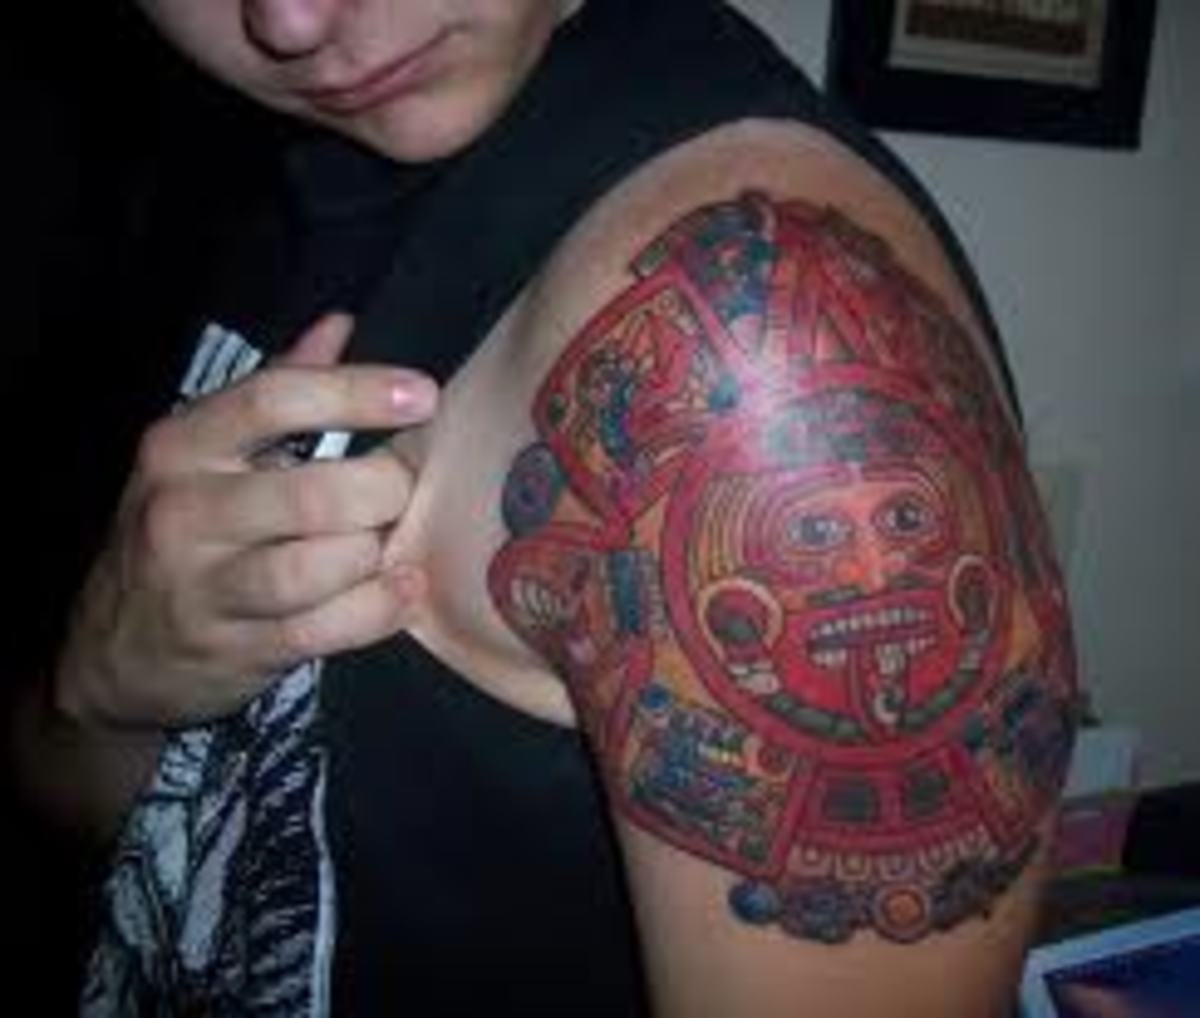 Aztec Tattoo Designs And Meanings-Aztec Tattoo Ideas And Symbolism -  HubPages